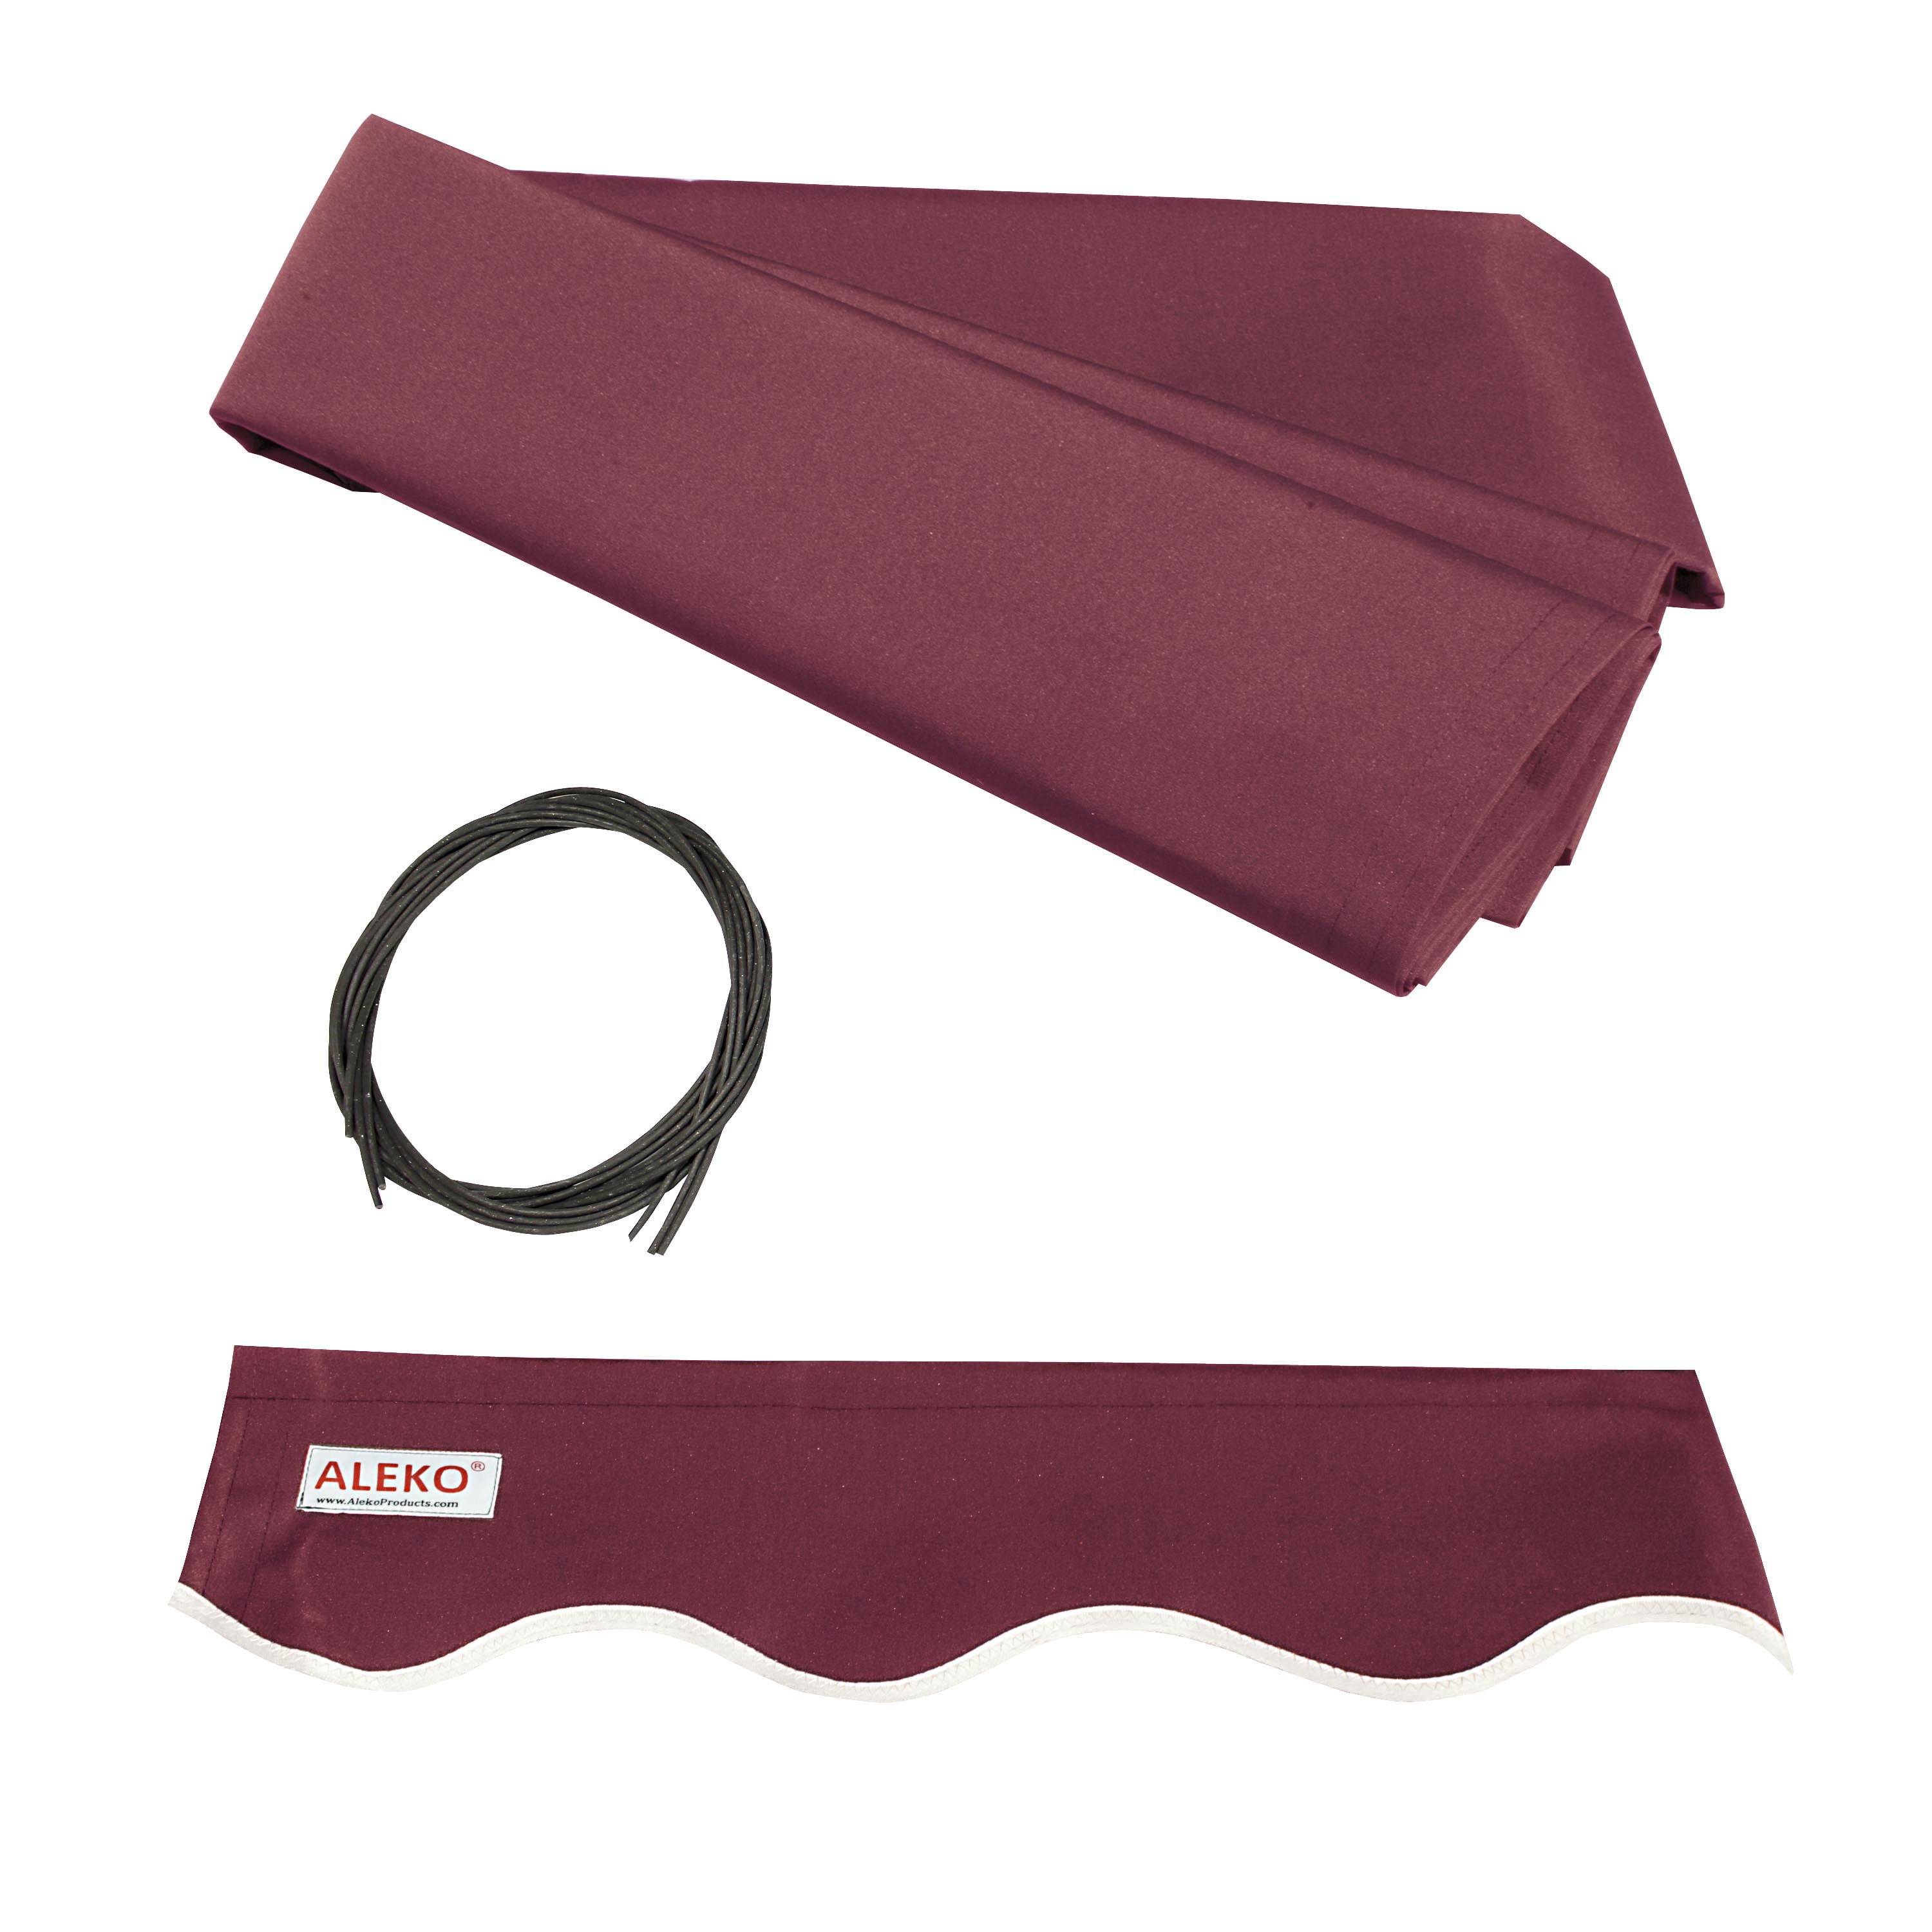 Picture of ALEKO Awning Fabric Replacement for Retractable 8 x 6.5 Ft Awning Burgundy